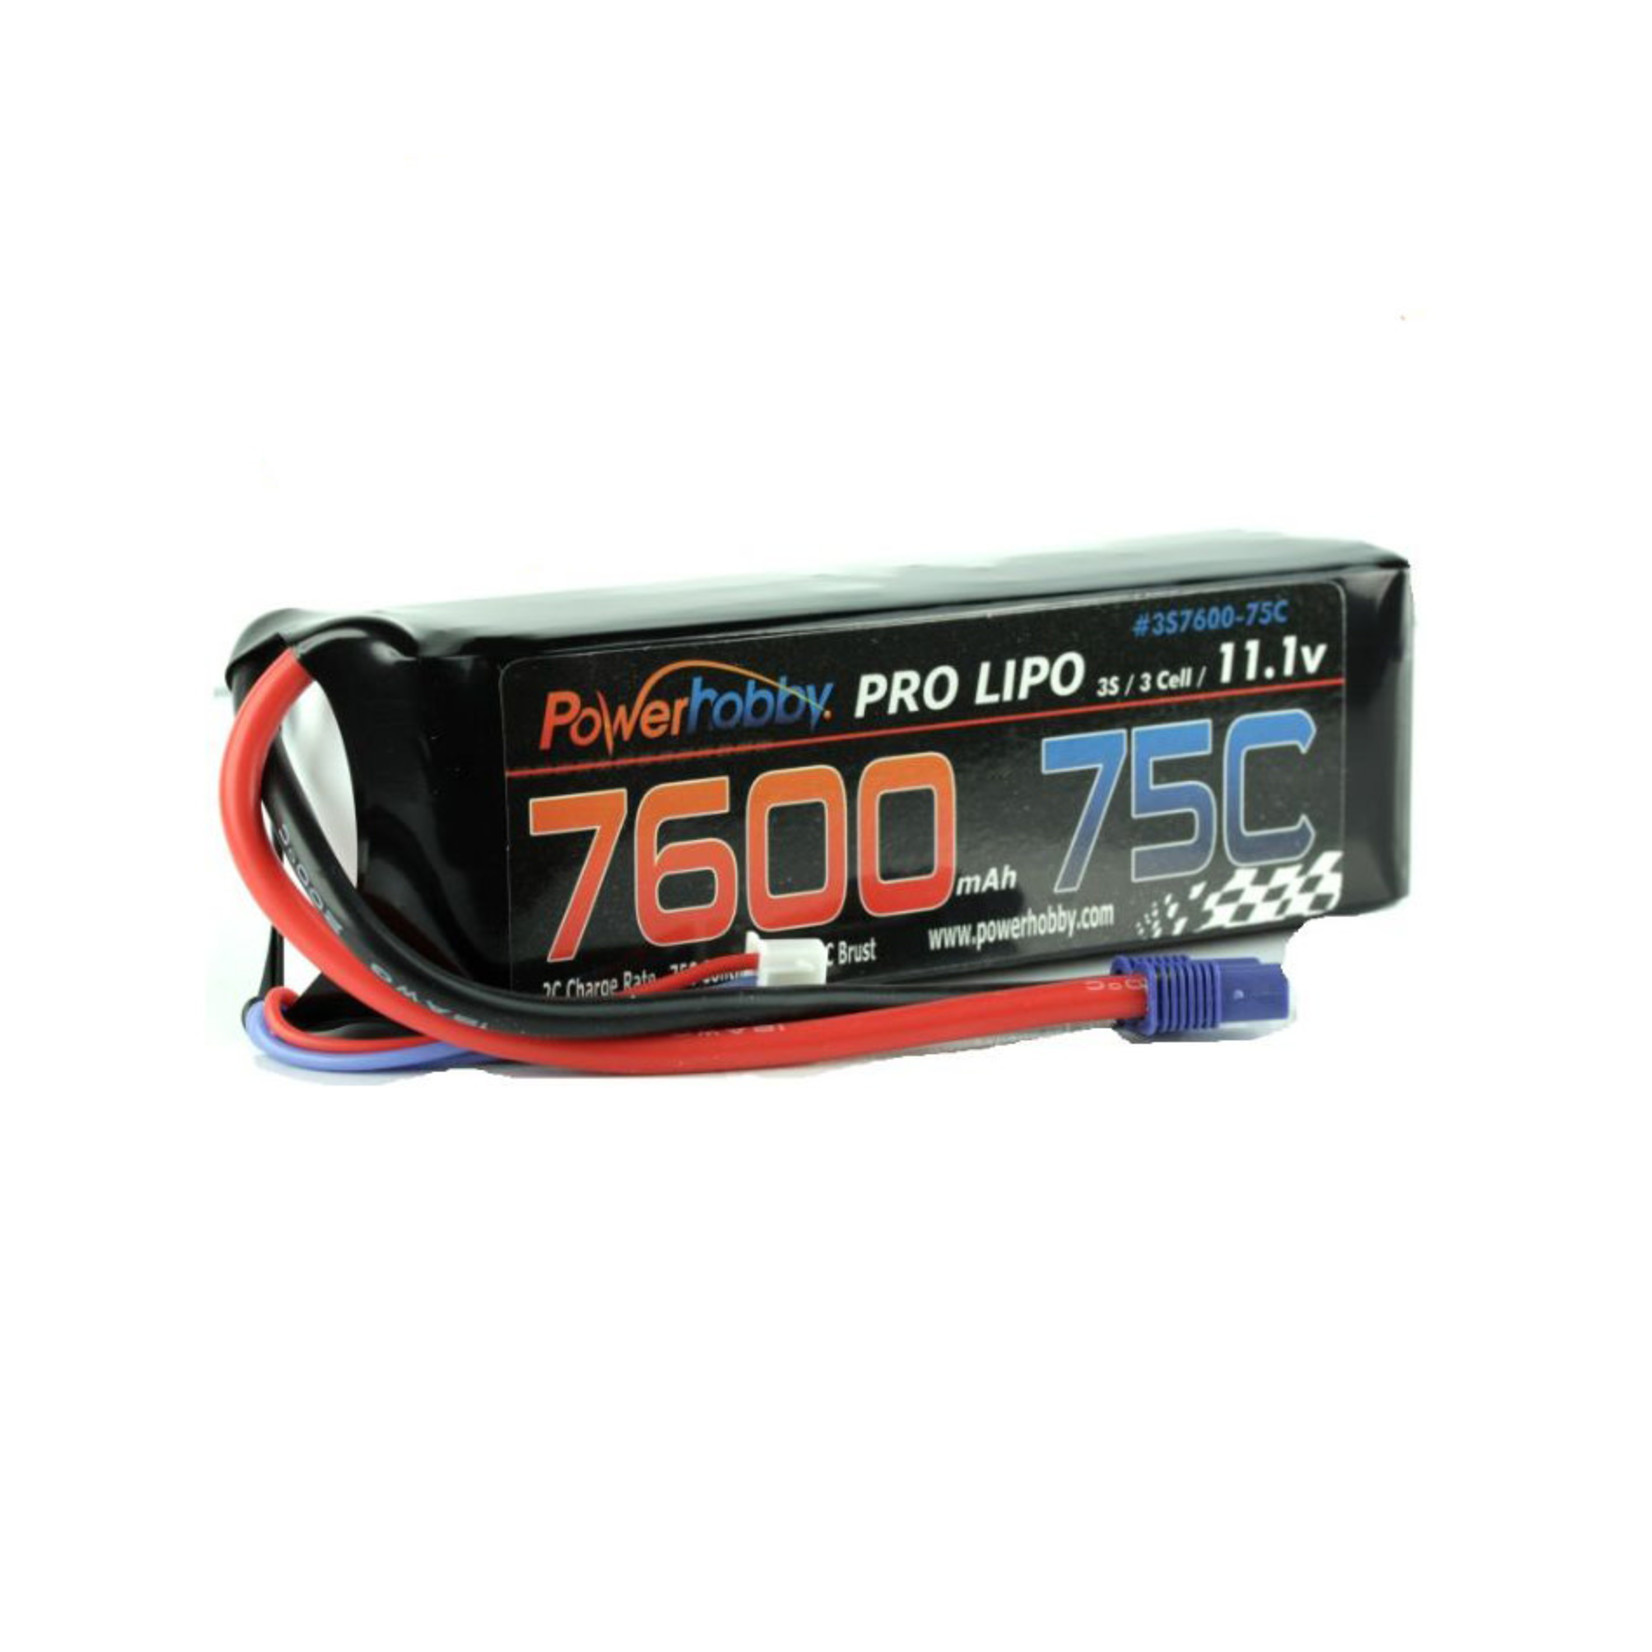 PowerHobby 7600mAh 11.1V 3S 75C LiPo Battery with Hardwired EC5 Connector